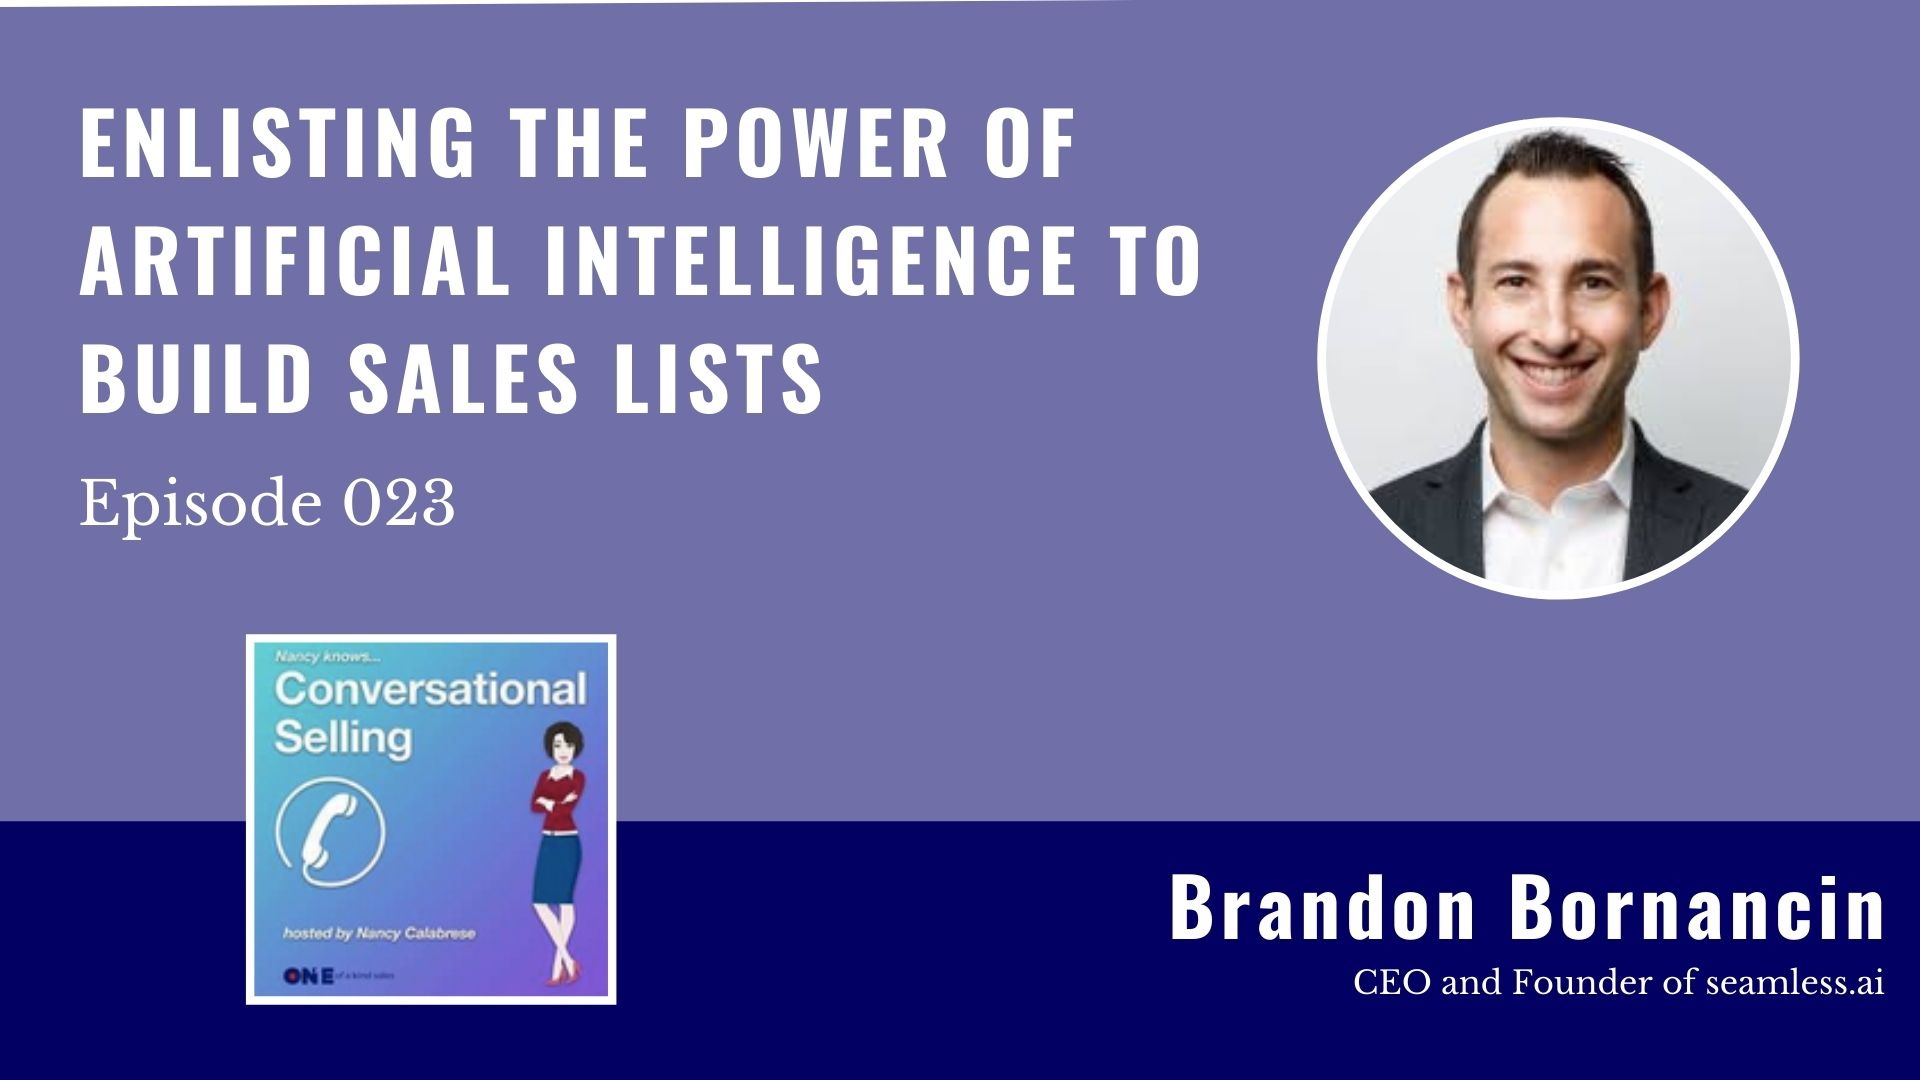 Brandon Bornancin | Enlisting the Power of Artificial Intelligence to Build Sales Lists